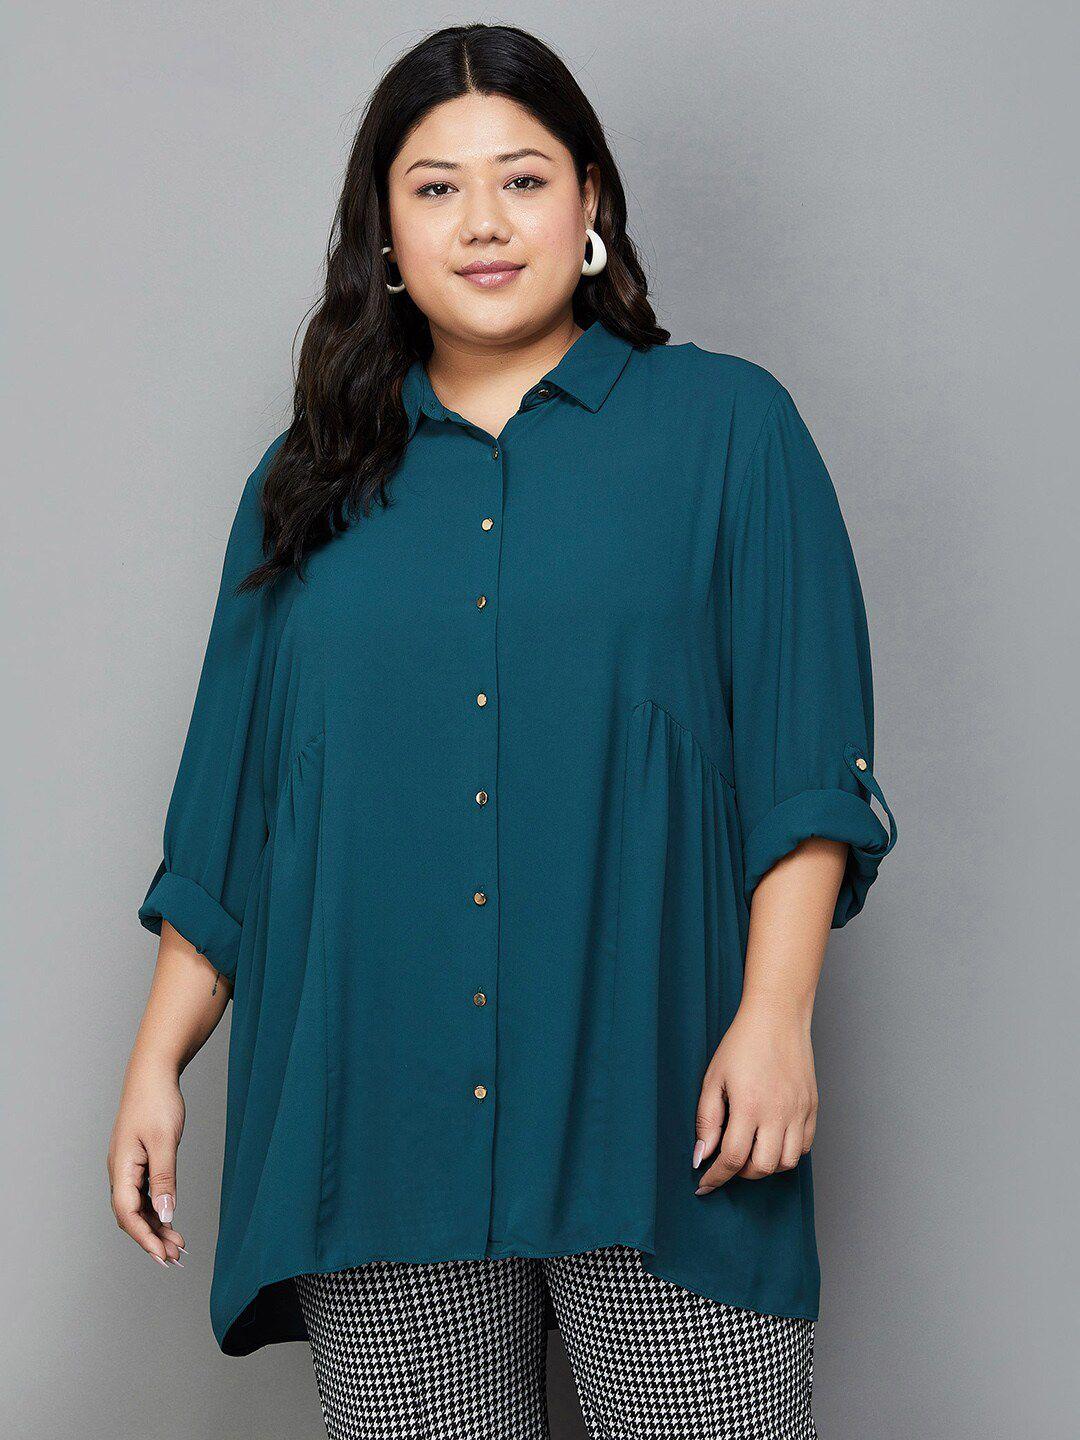 nexus by lifestyle plus size roll-up sleeves shirt style top